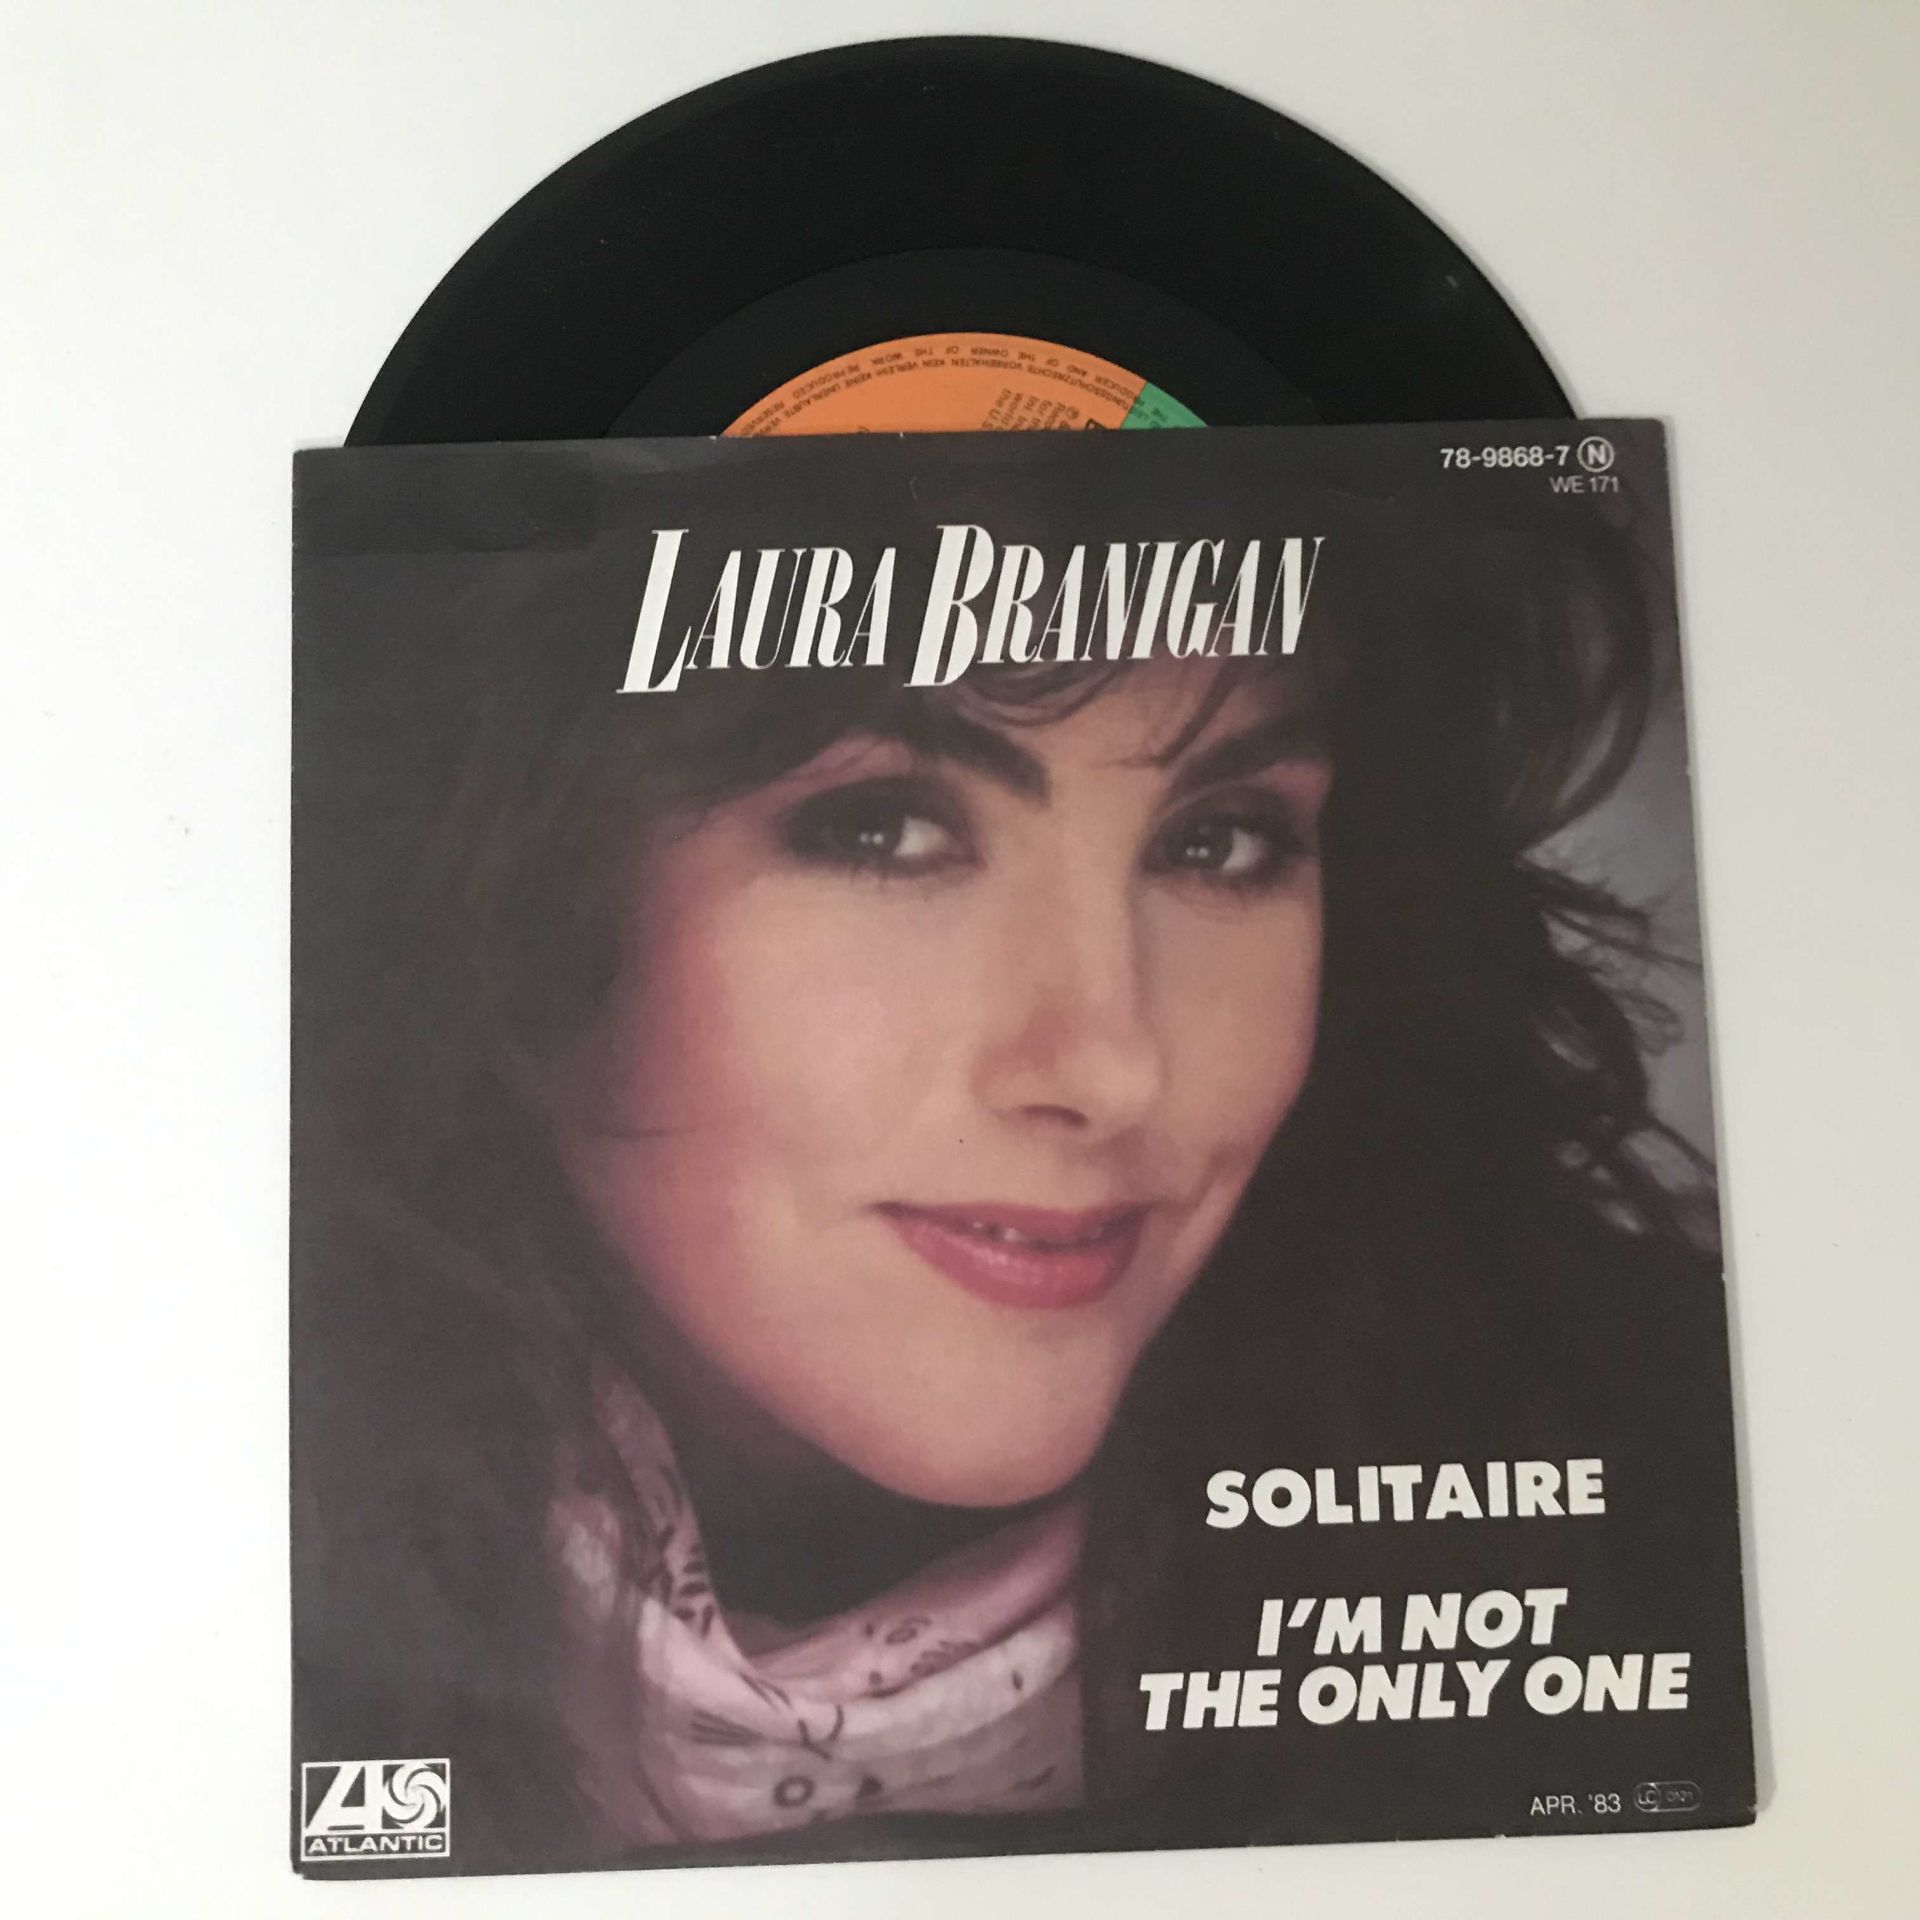 Laura Branigan – Solitaire / I'm Not The Only One